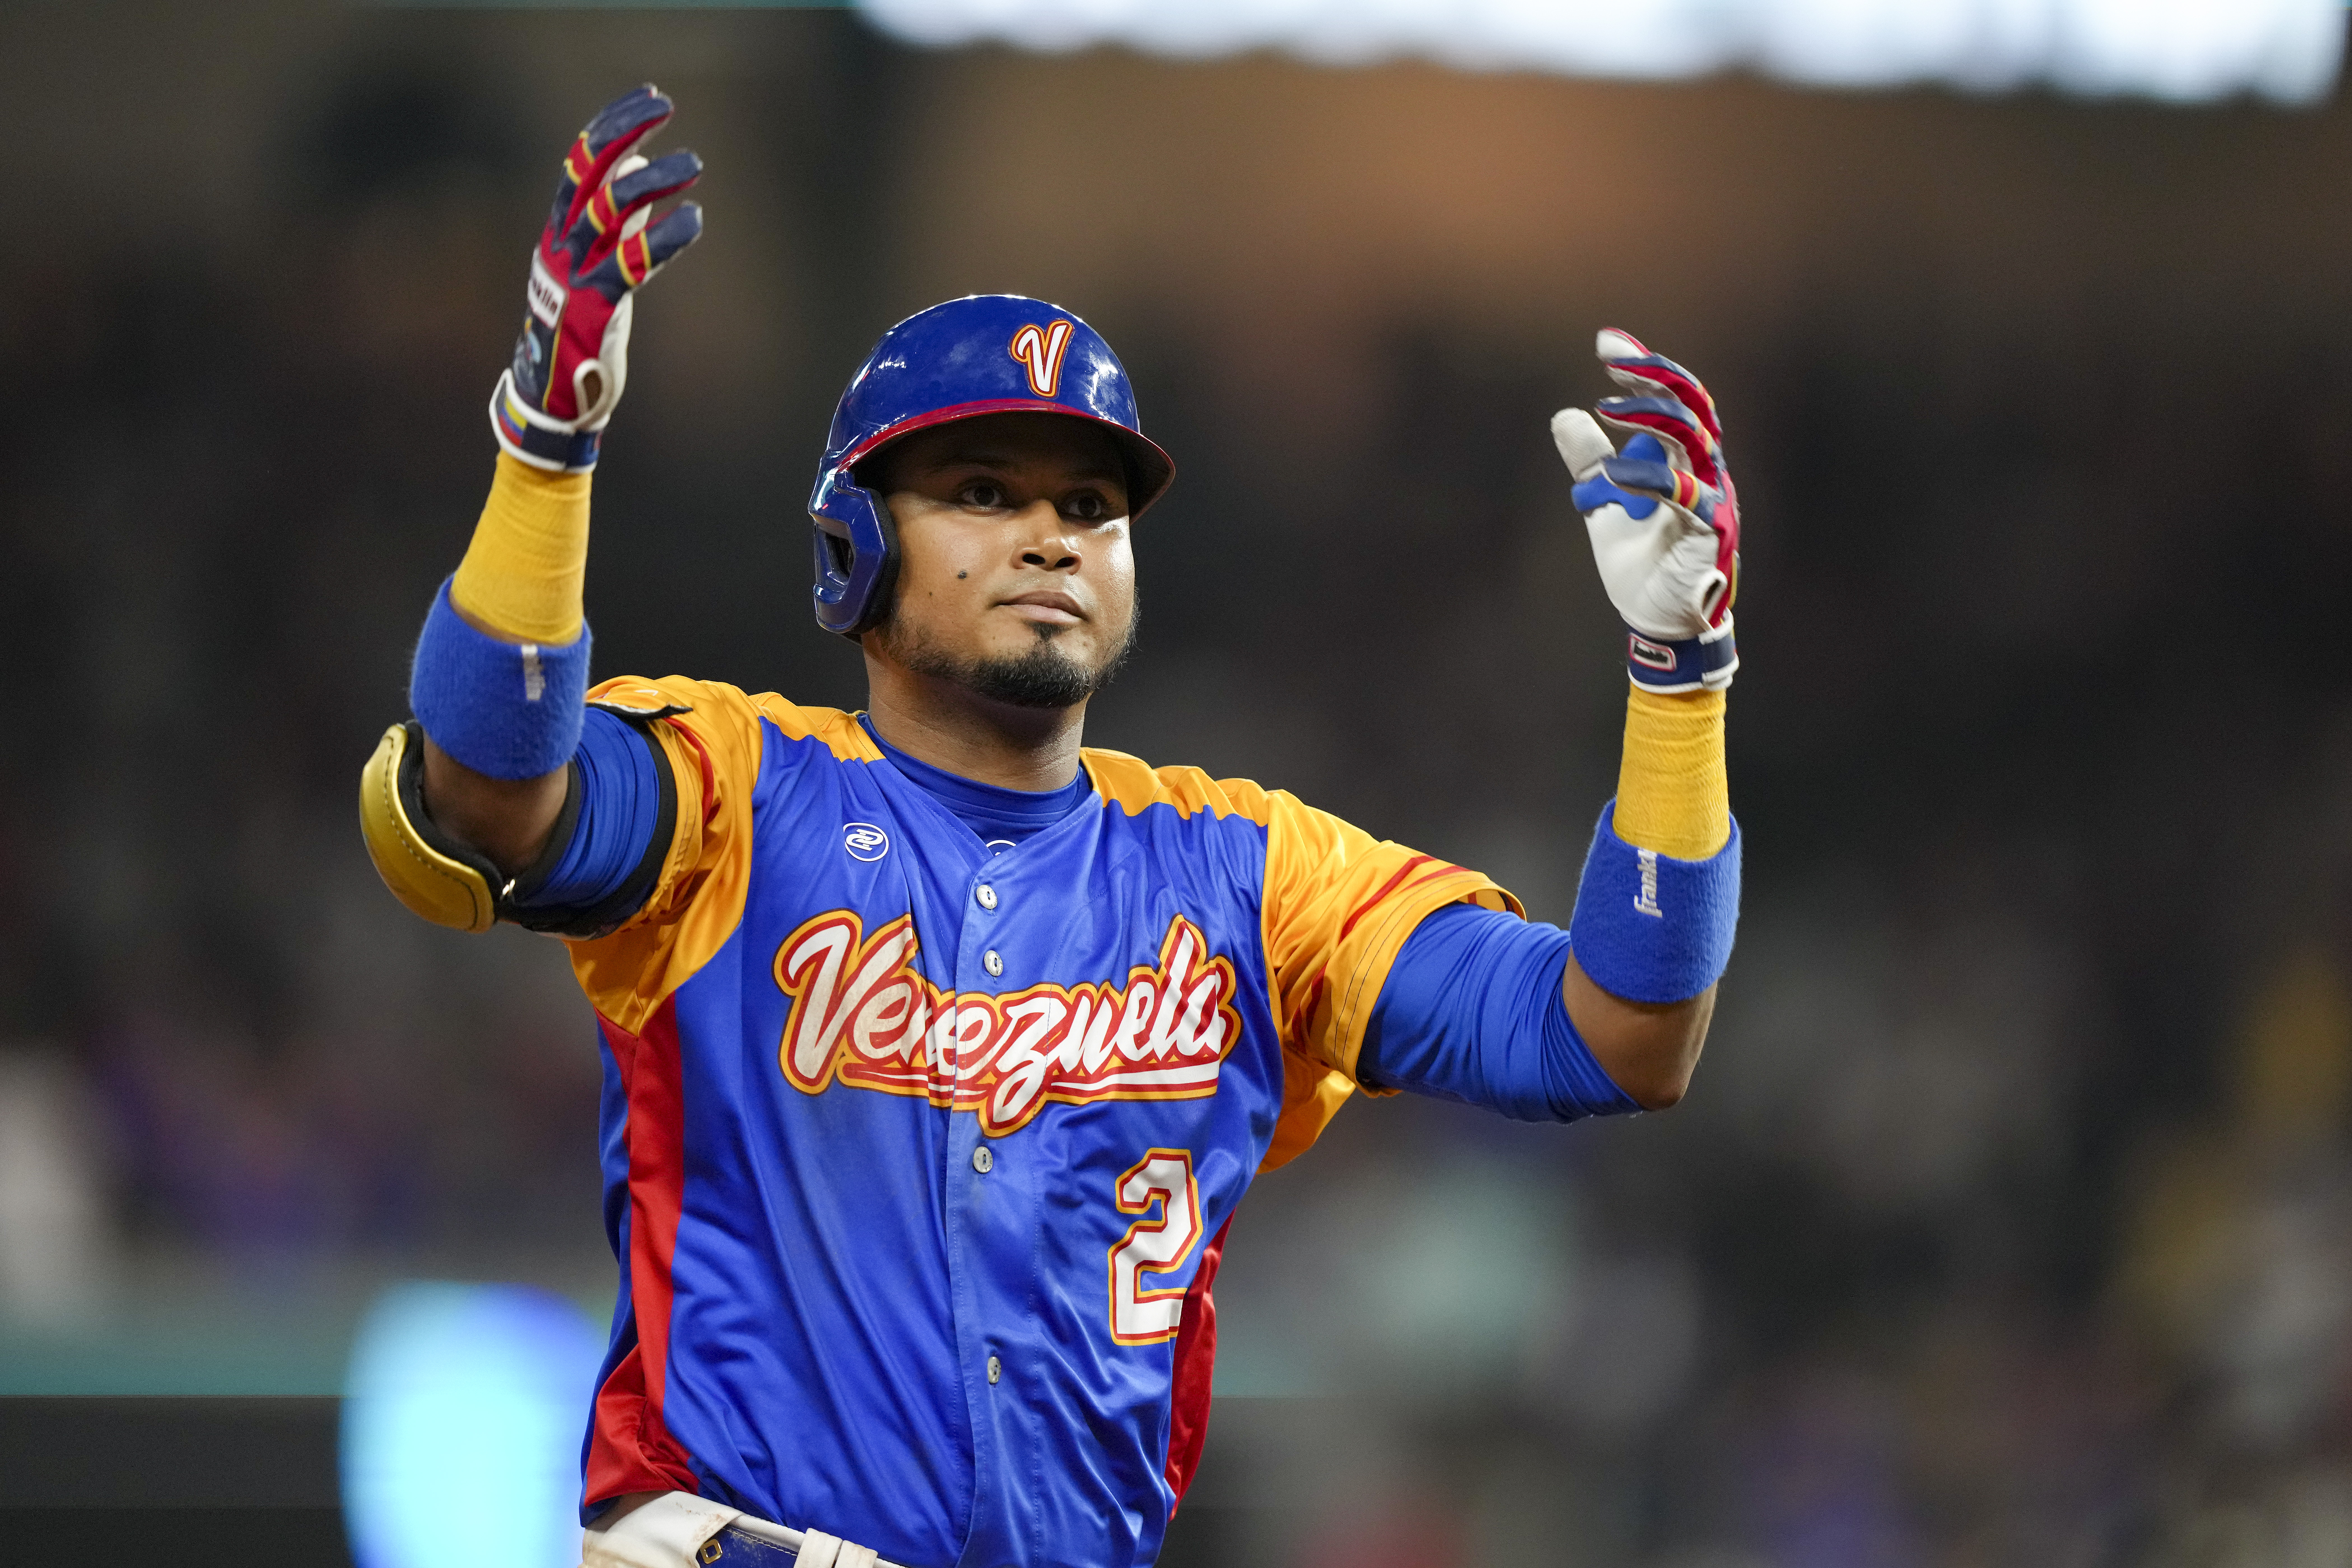 Luis Arraez #2 of Venezuela celebrates after hitting a home run during the seventh inning of a 2023 World Baseball Classic Quarterfinal game against The United States at loanDepot park on March 18, 2023 in Miami, Florida.